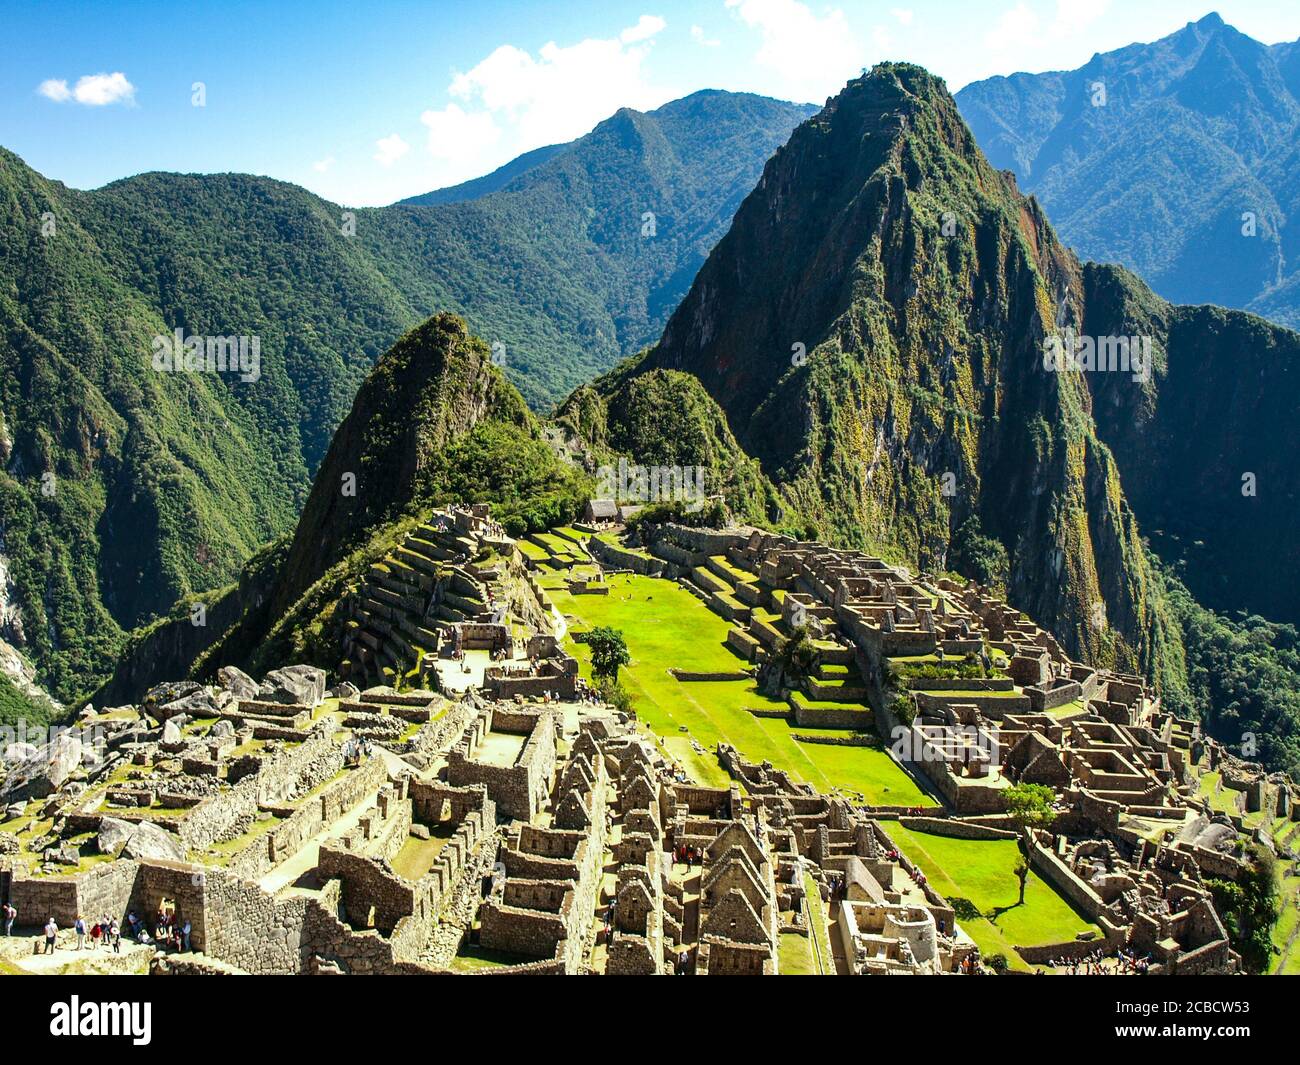 Machu Picchu, peruvian lost city of Incas situated on mountain ridge above Sacred Valley of Urubamba River in Cusco Region, Peru. UNESCO World Heritage and one of the New Seven Wonders of the World Stock Photo